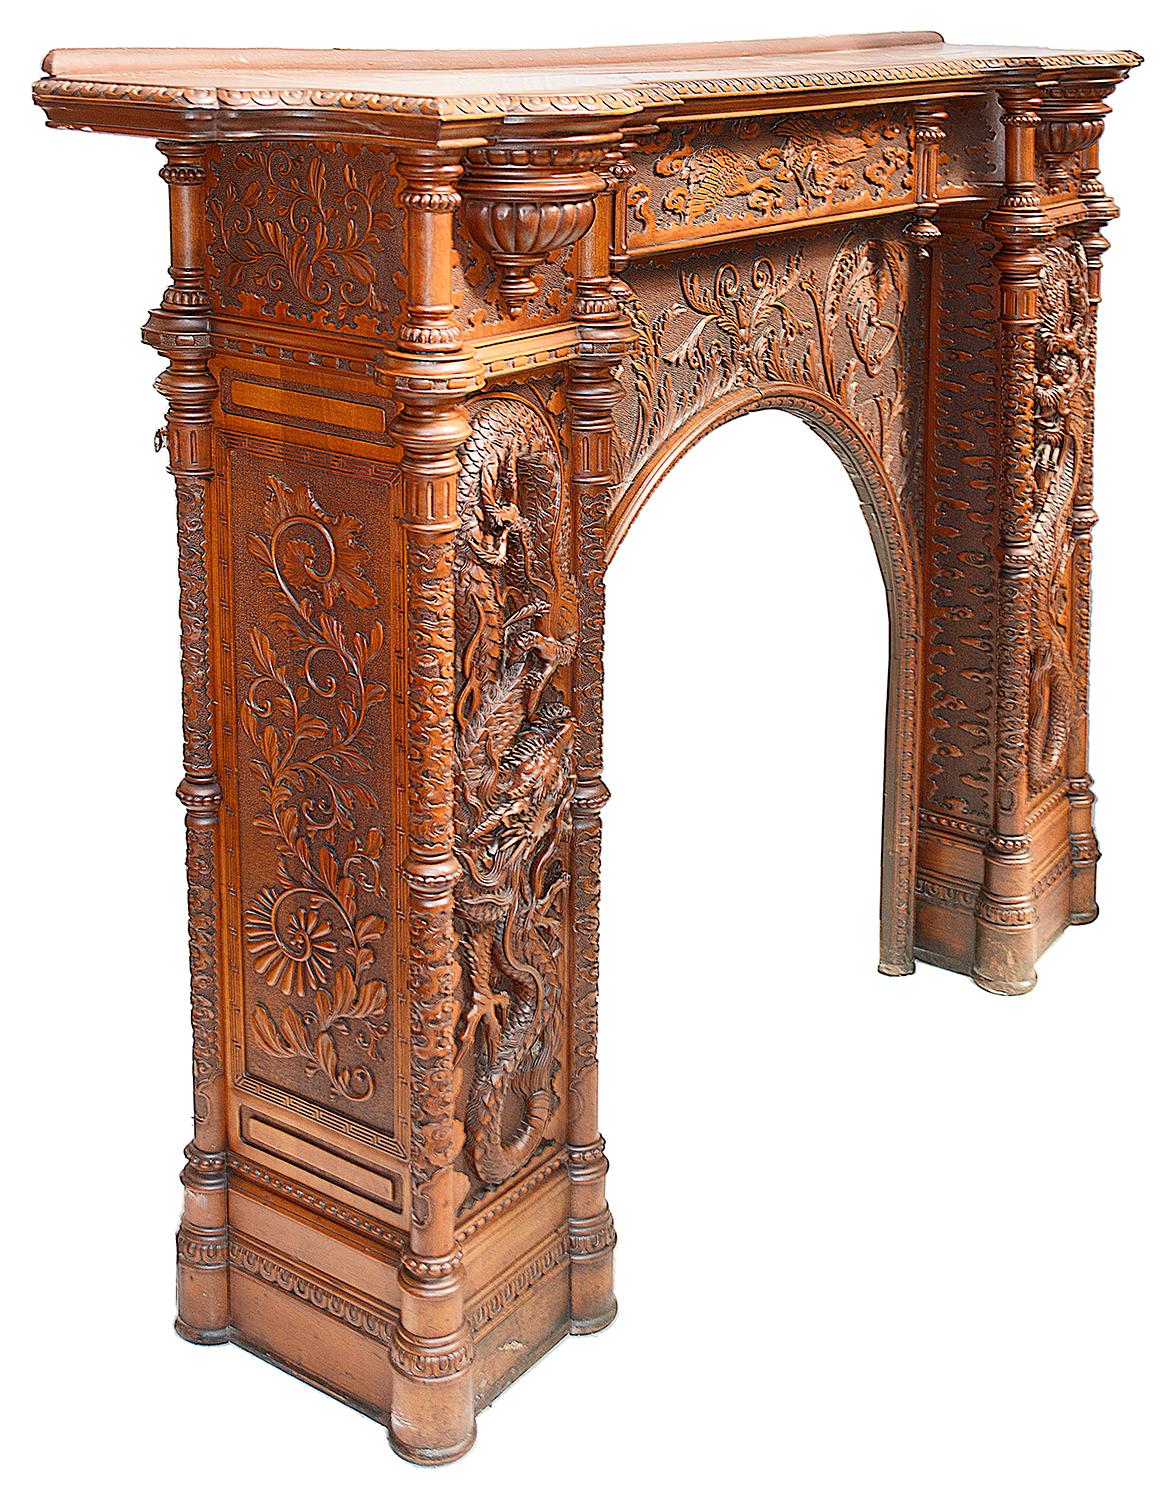 A rare and spectacular large Japanese carved wood fire place, having wonderful carved panels to the pelmet depicting cranes flying amongst clouds, turned columns and reeded brackets. Either side having wonderful mythical dragons entwinned between